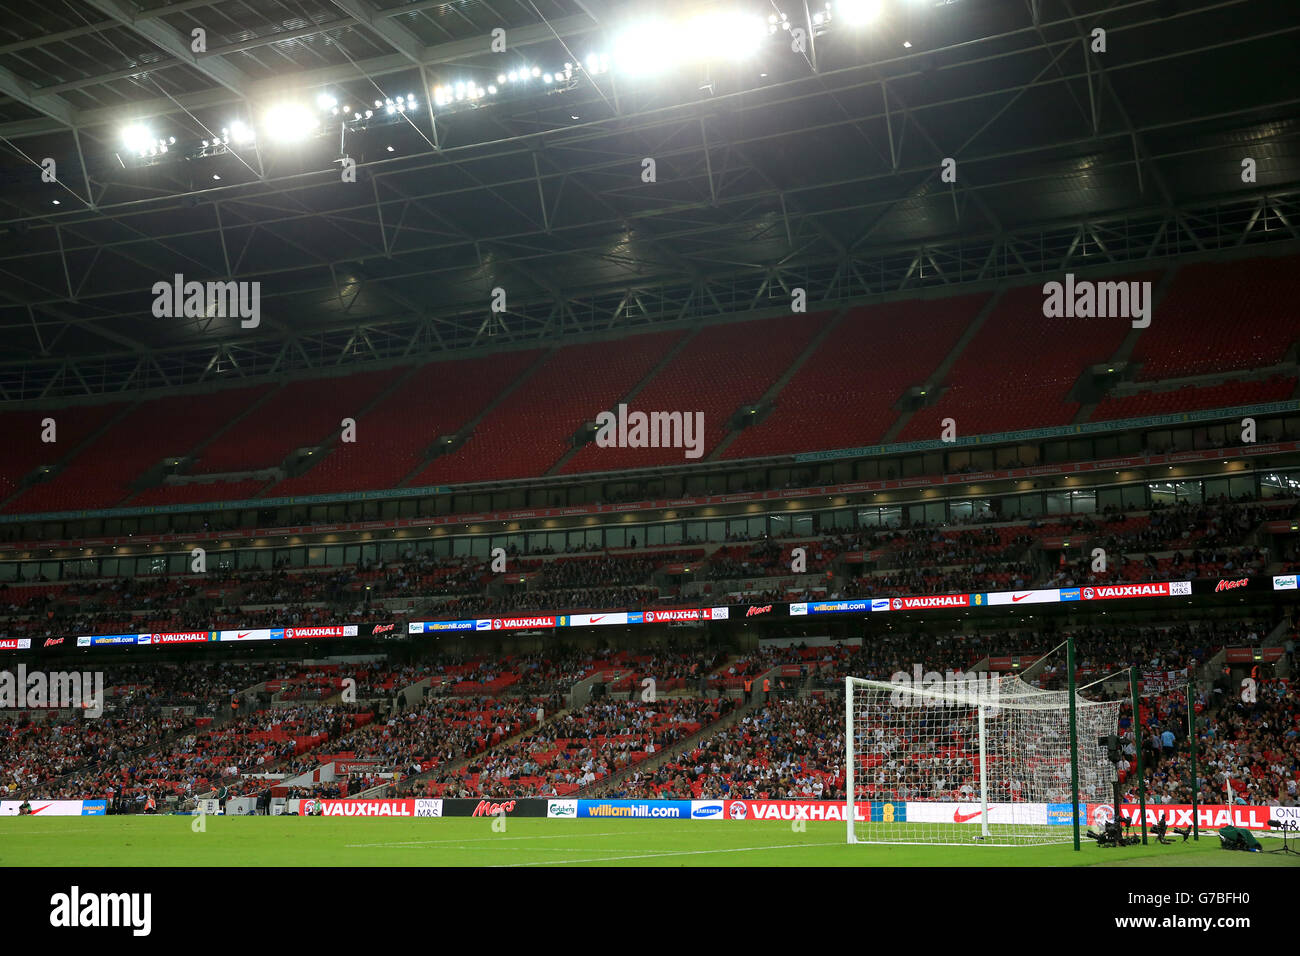 The empty top tier can be seen during the International Friendly at Wembley Stadium, London. PRESS ASSOCIATION Photo. Picture date: Wednesday September 3, 2014. See PA story SOCCER England. Photo credit should read: Nick Potts/PA Wire. Stock Photo